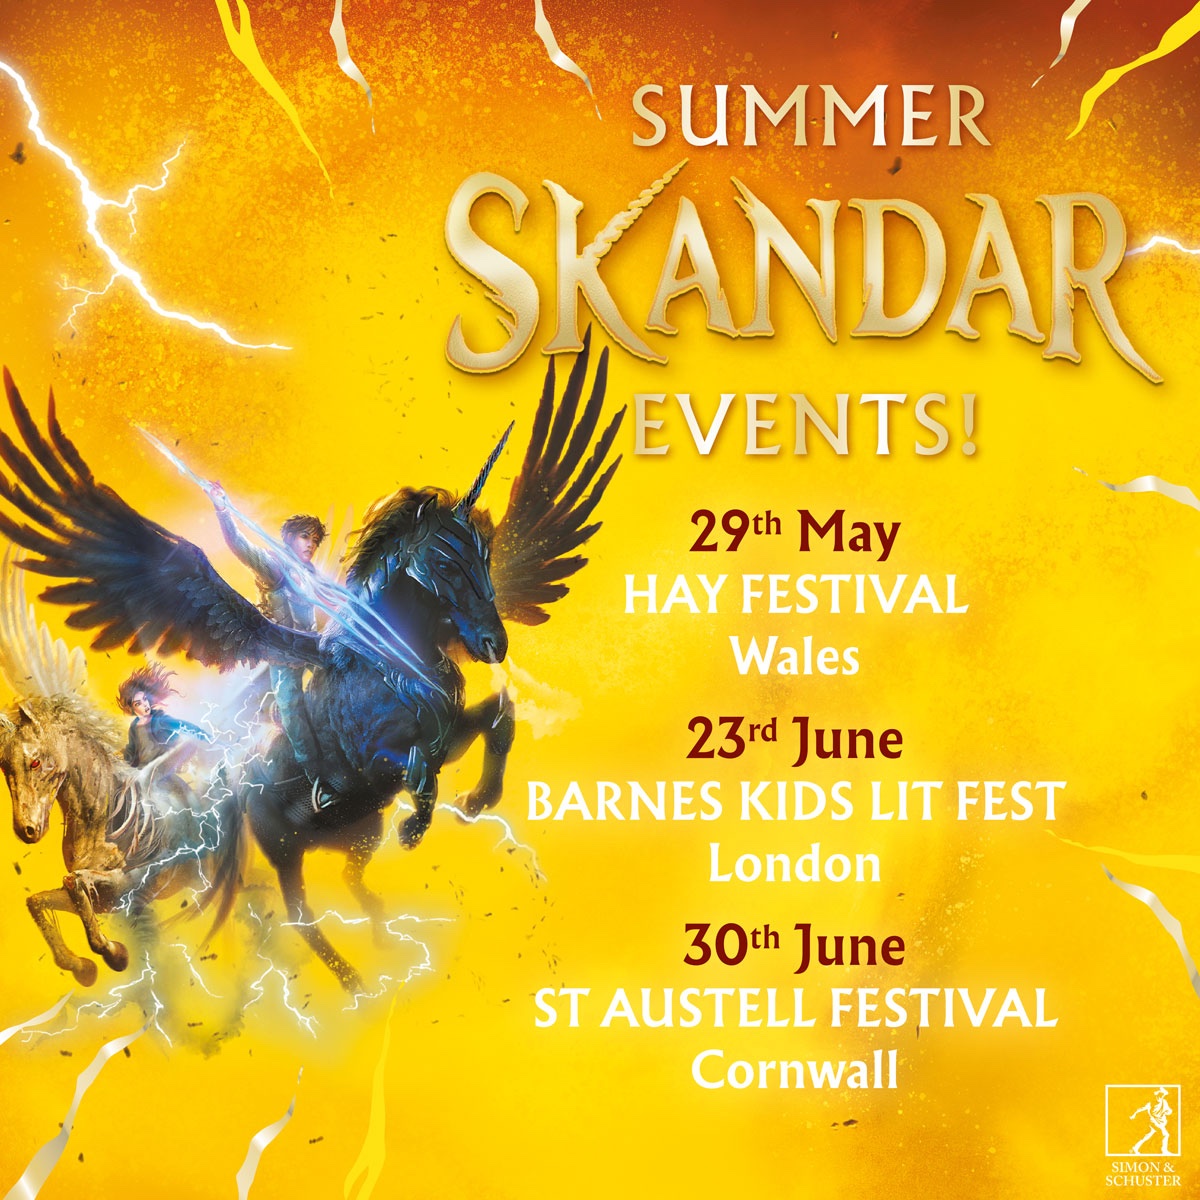 Lots of you have been asking whether I’ll be doing any Skandar events this summer and the answer is YES!! Here are the details and you can find links to tickets and info here: linktr.ee/skandarevents